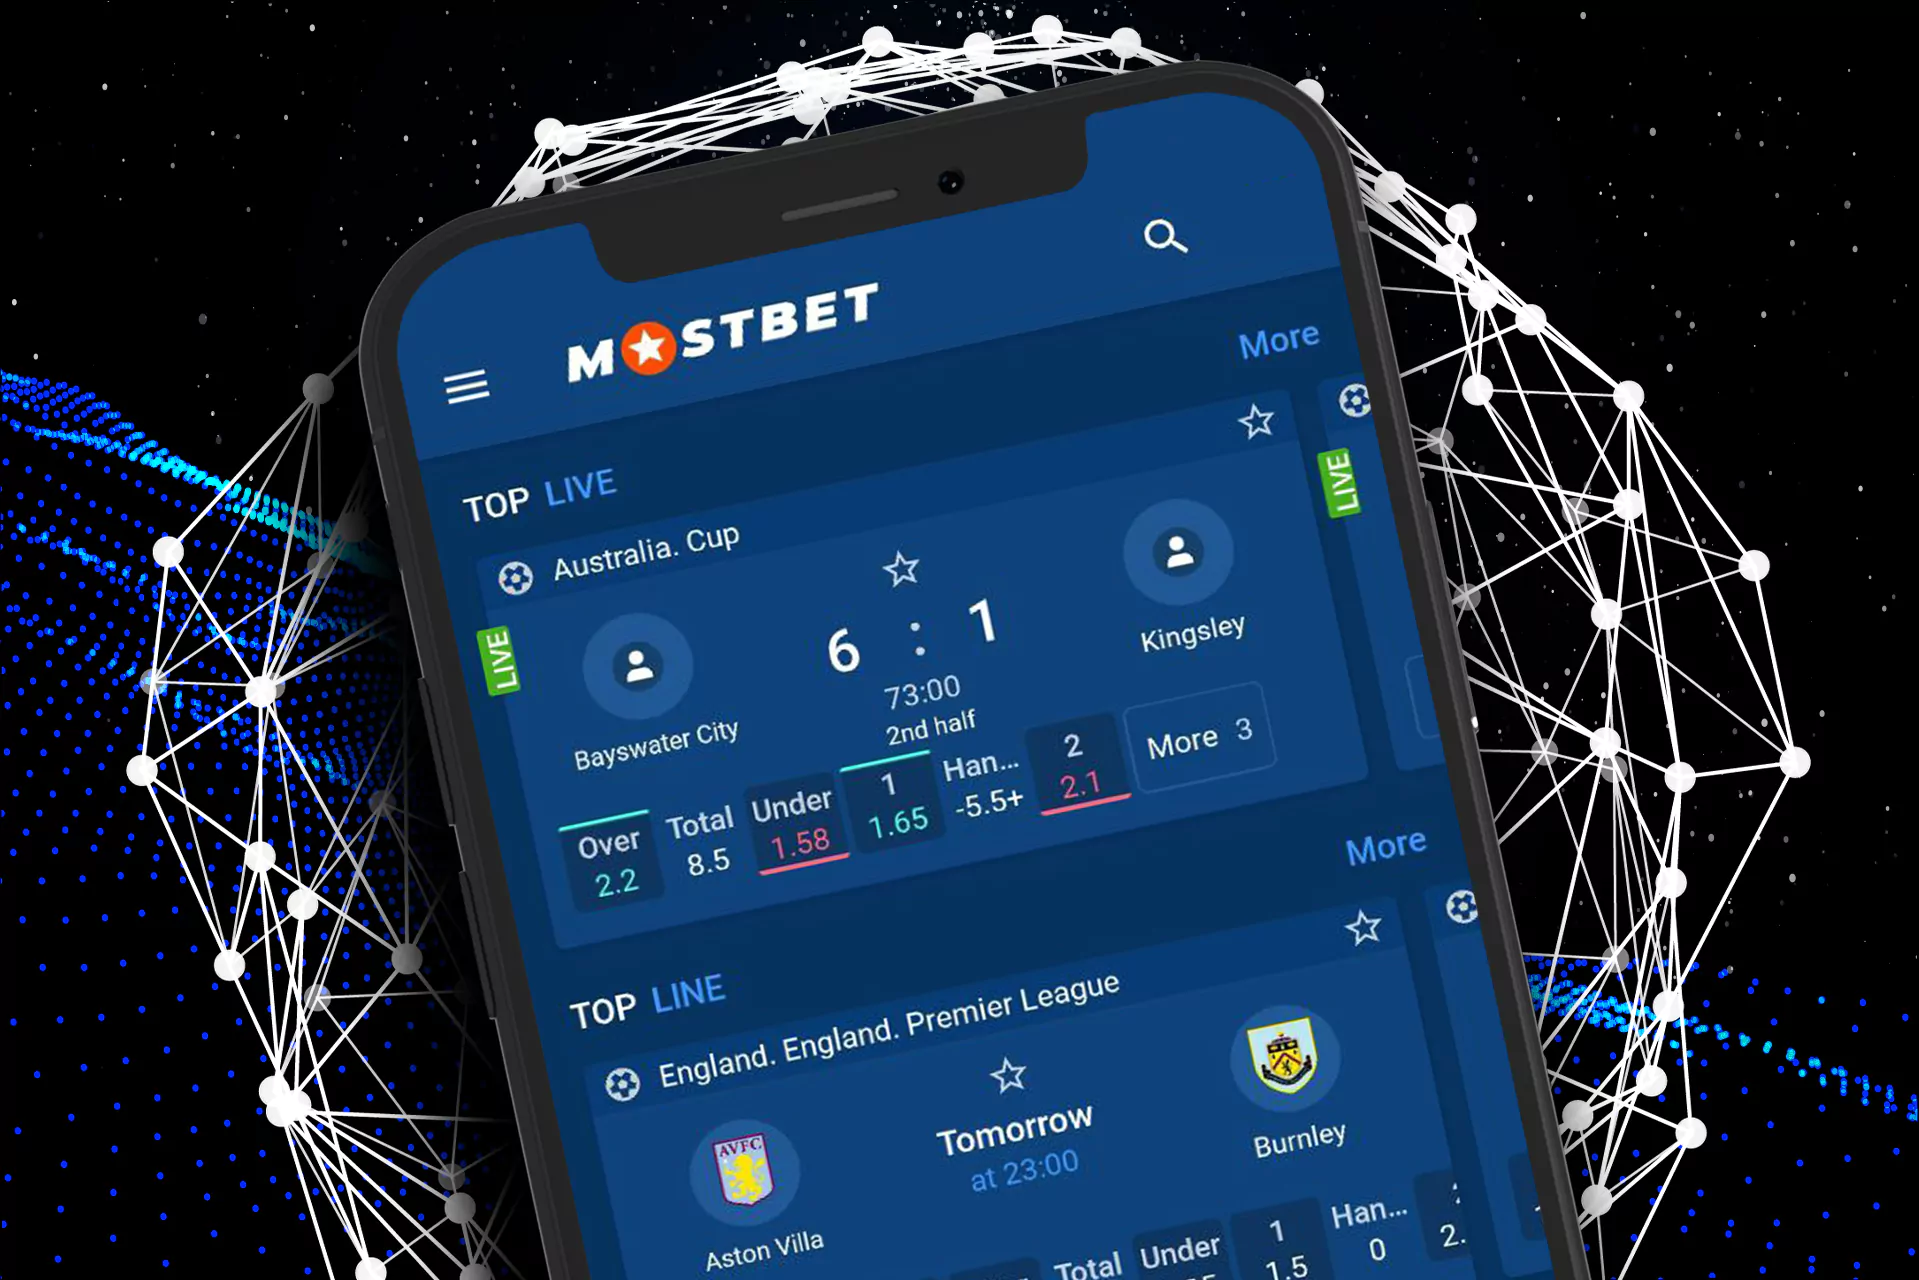 Bright distinguishing features of the Mostbet app.